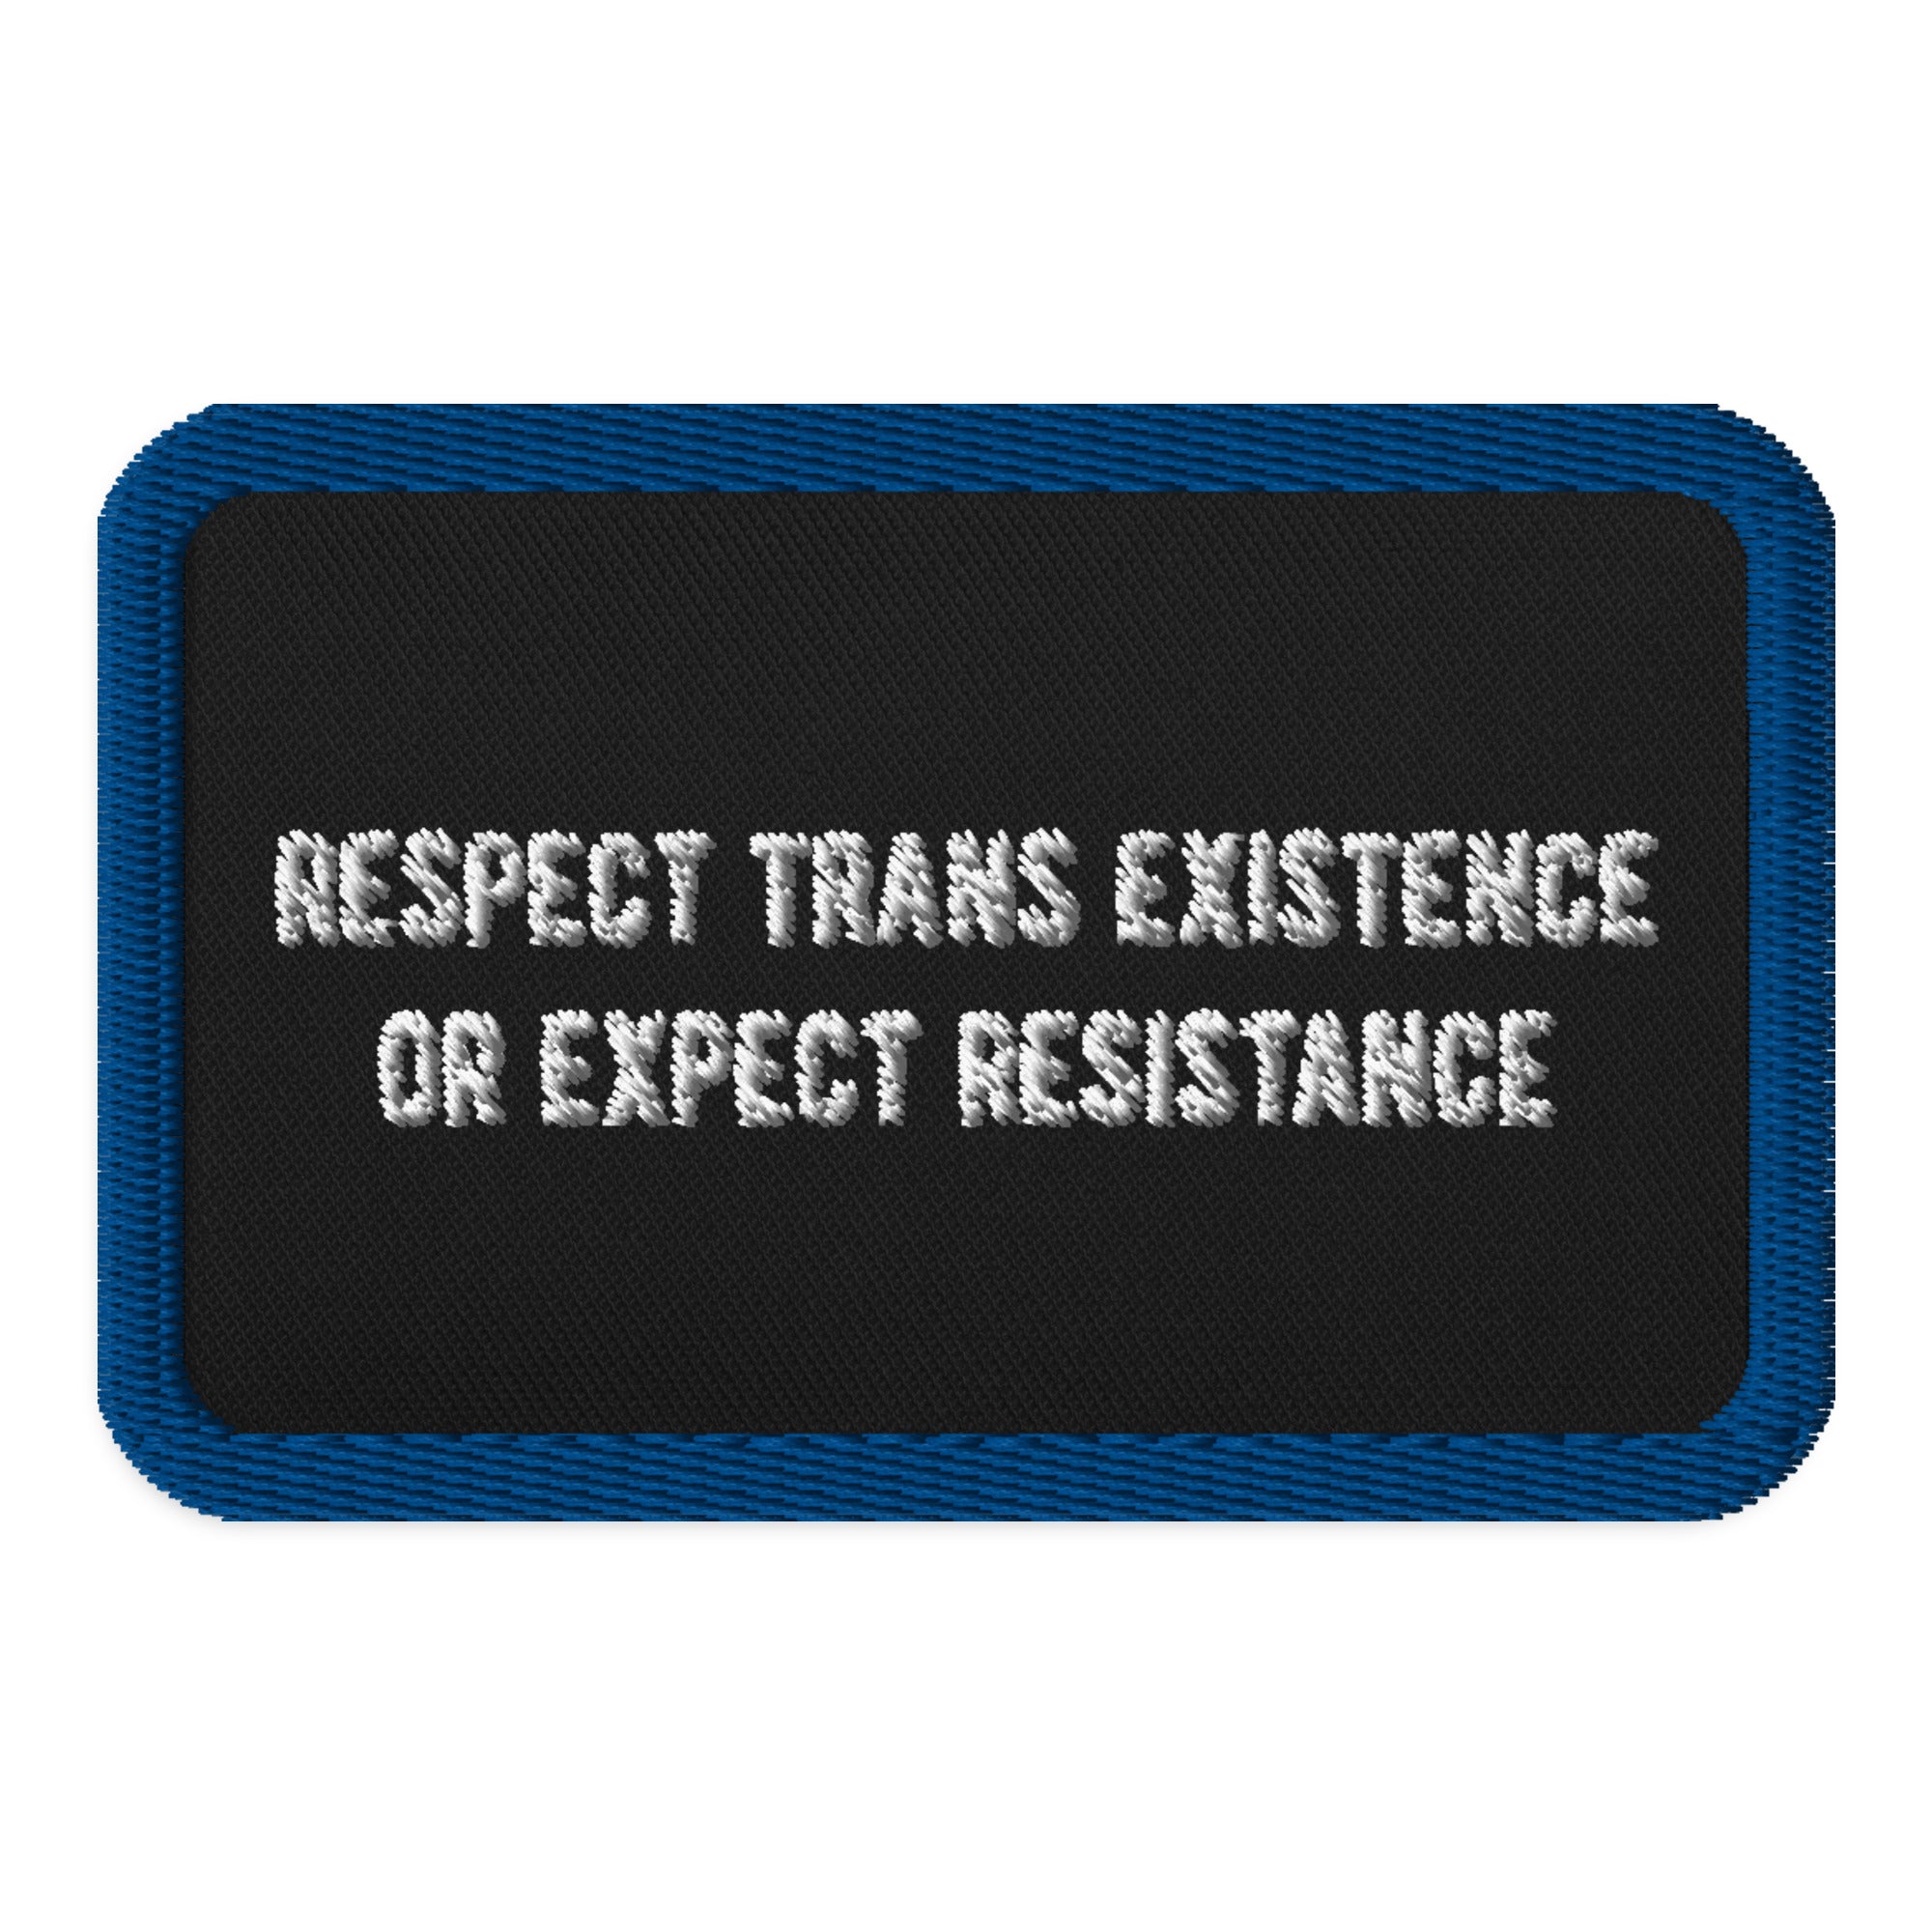 Respect Trans Existence Patch